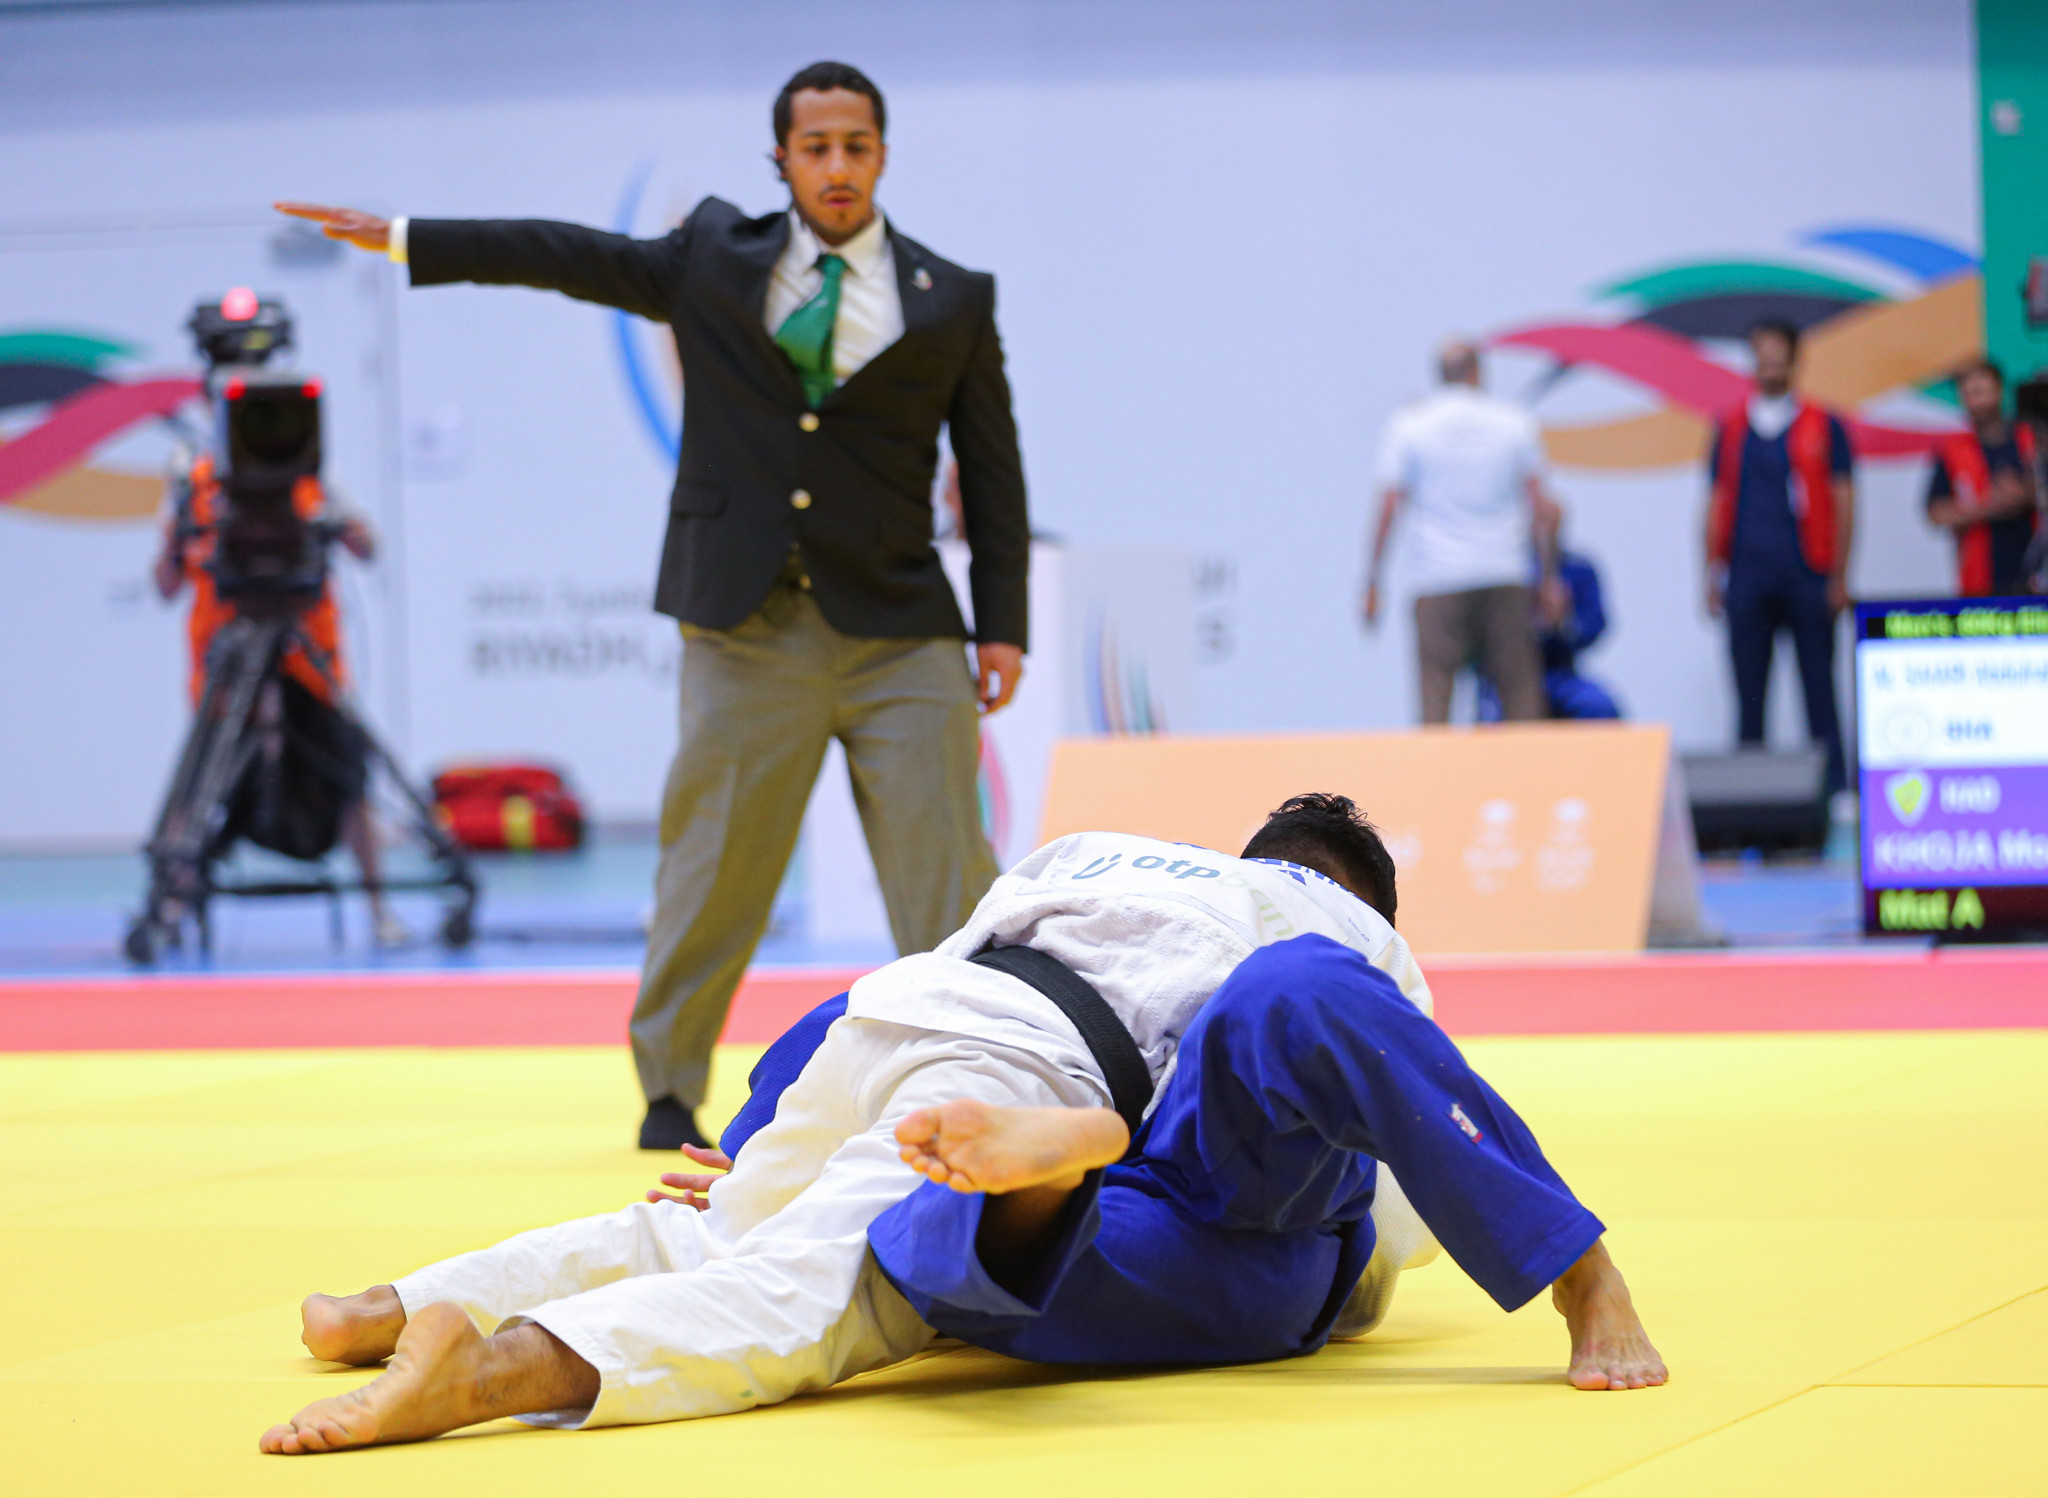 Saudi Games: Day one of competition